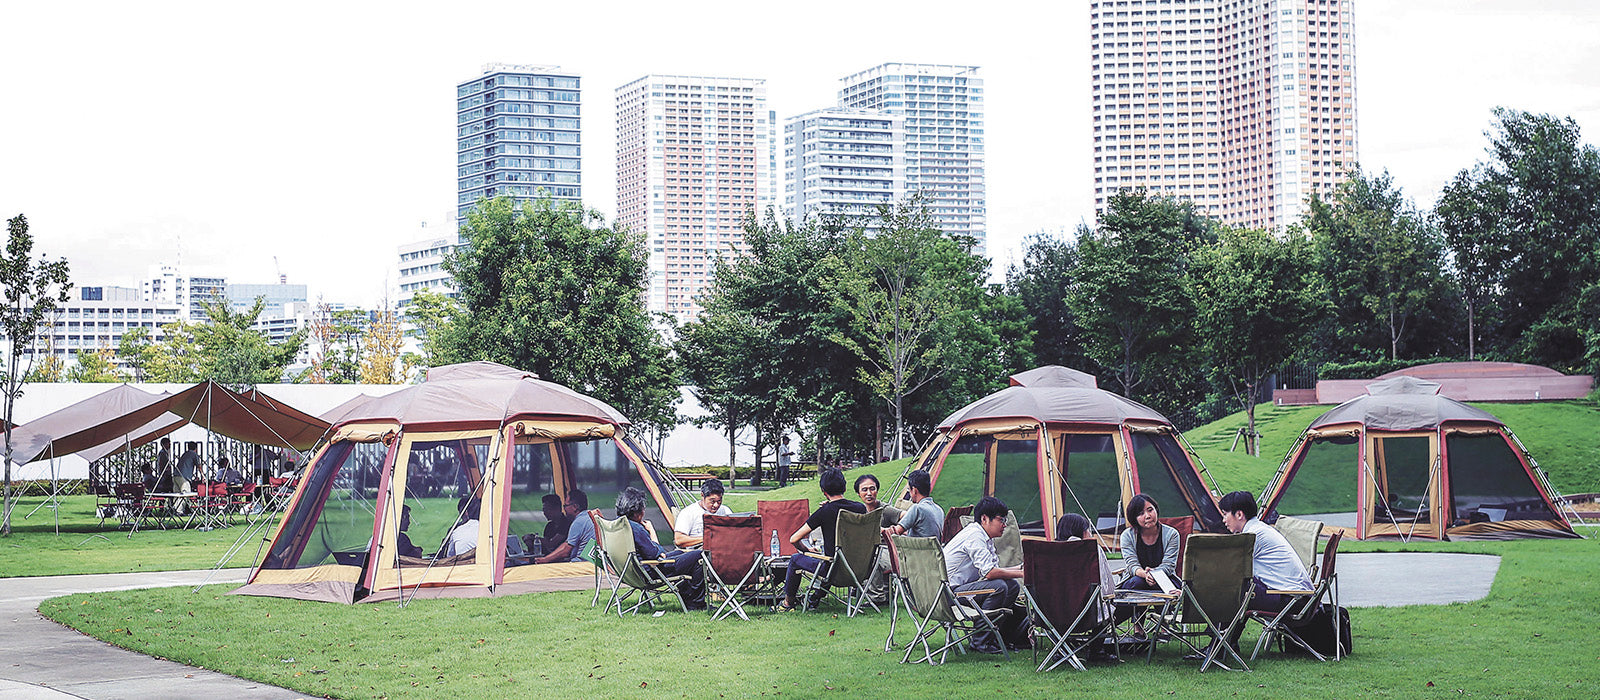 Image of campers on a campfield in front of urban setting